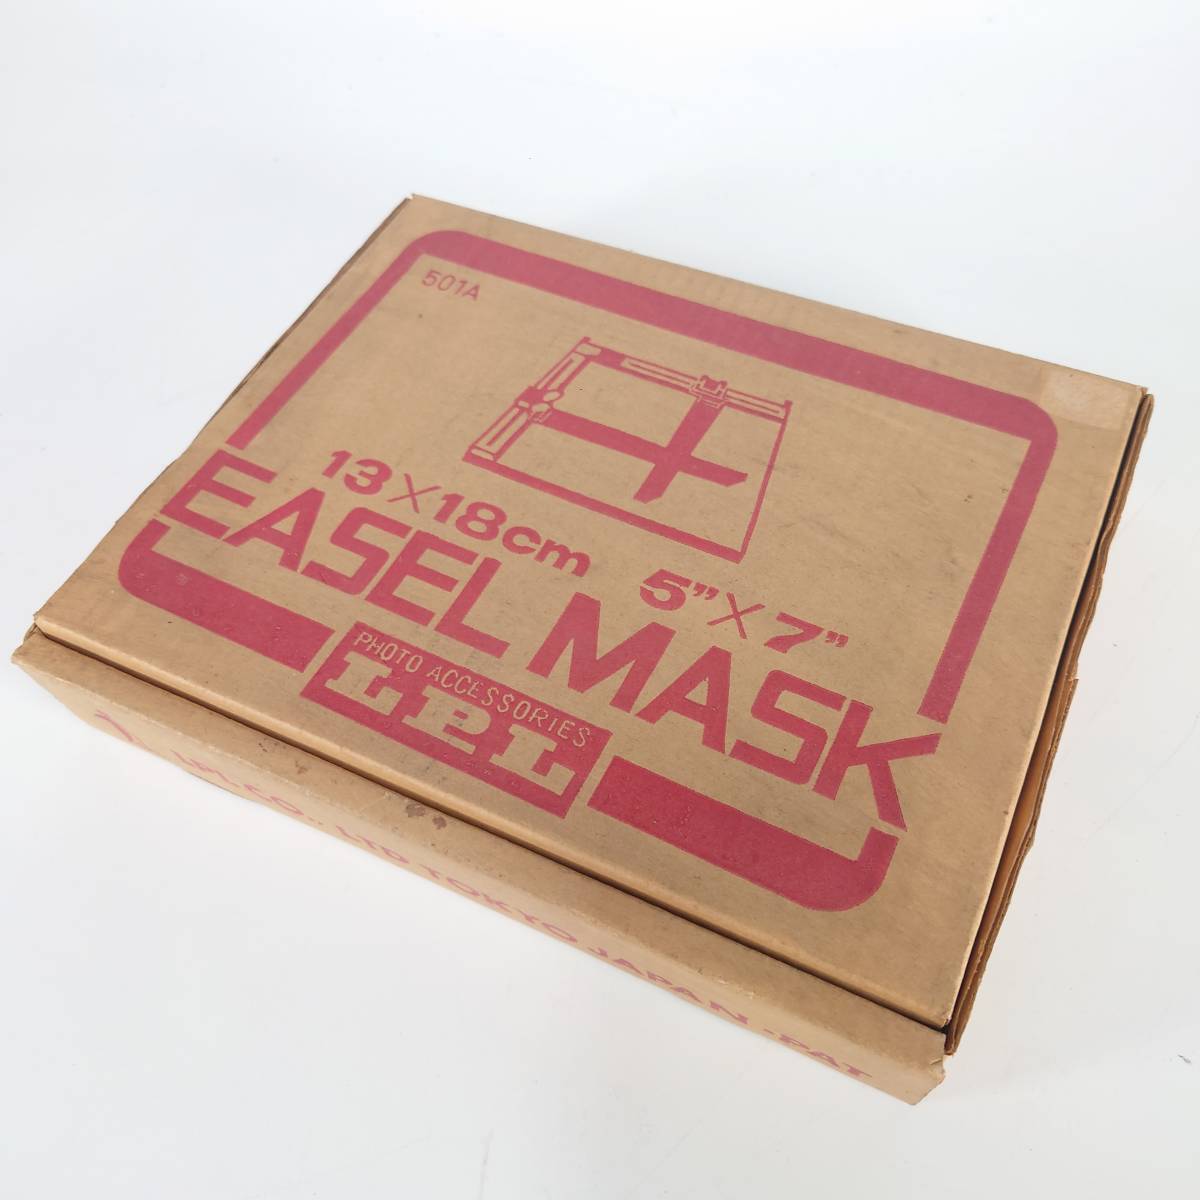 LPL EASEL MASK 13×18cm 5&#34;x7&#34; reality image .. film camera present condition goods 